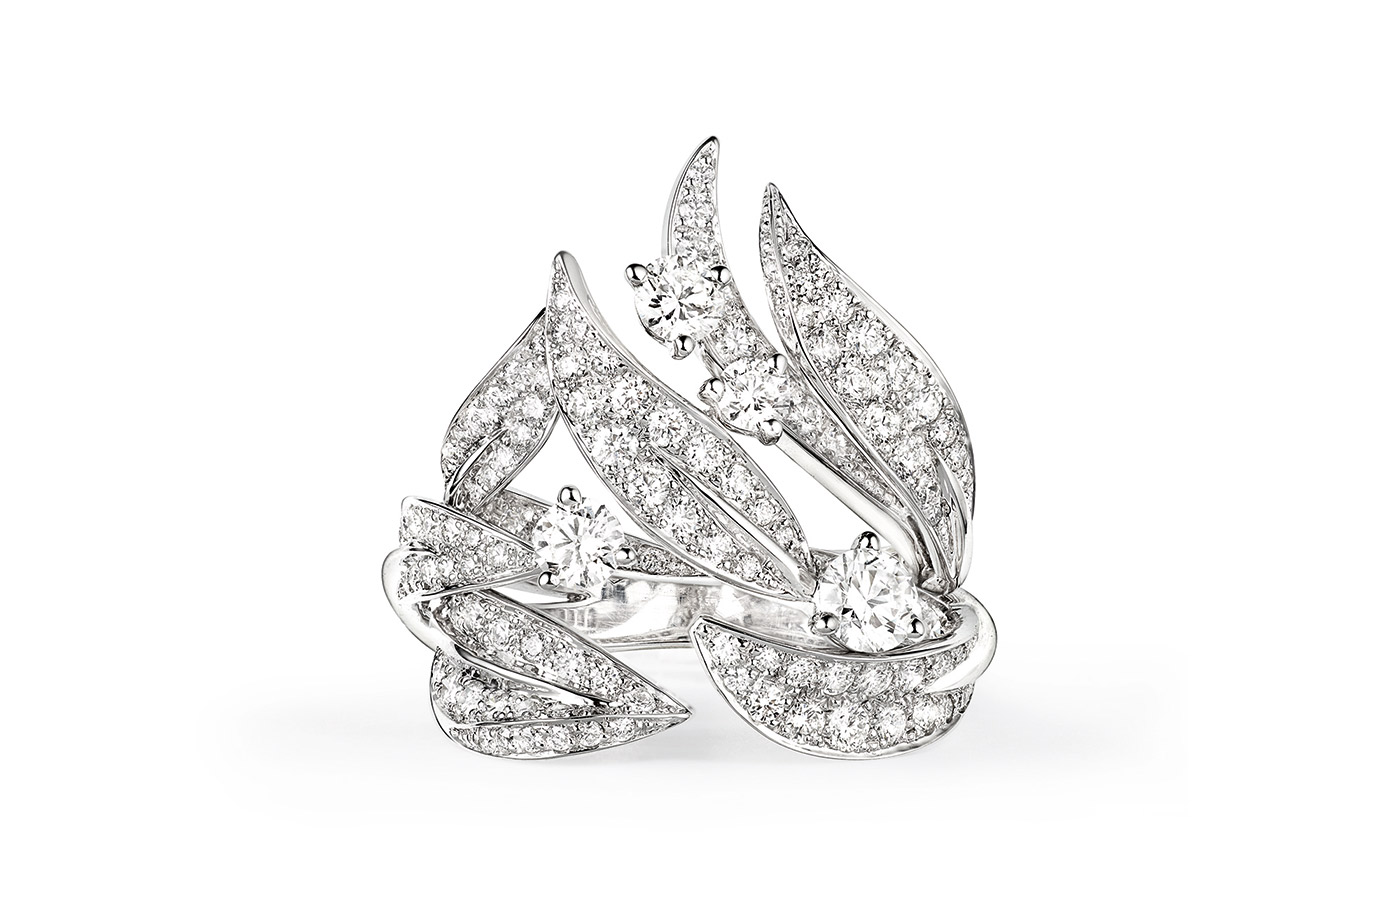 Chaumet introduce their latest collection - Laurier - embellished with ...